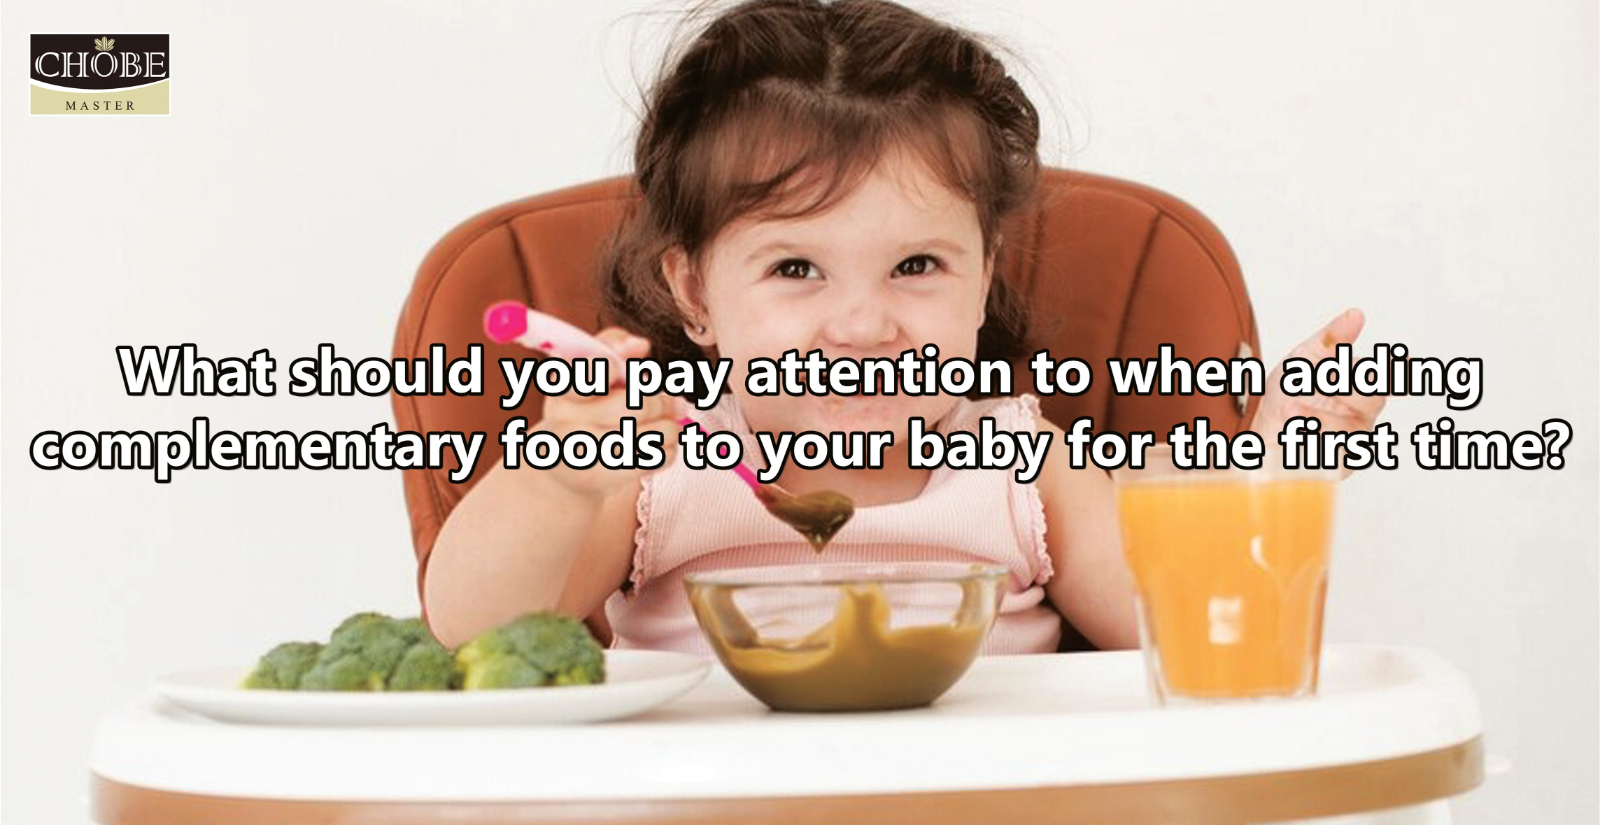 What should you pay attention to when adding complementary foods to your baby for the first time?